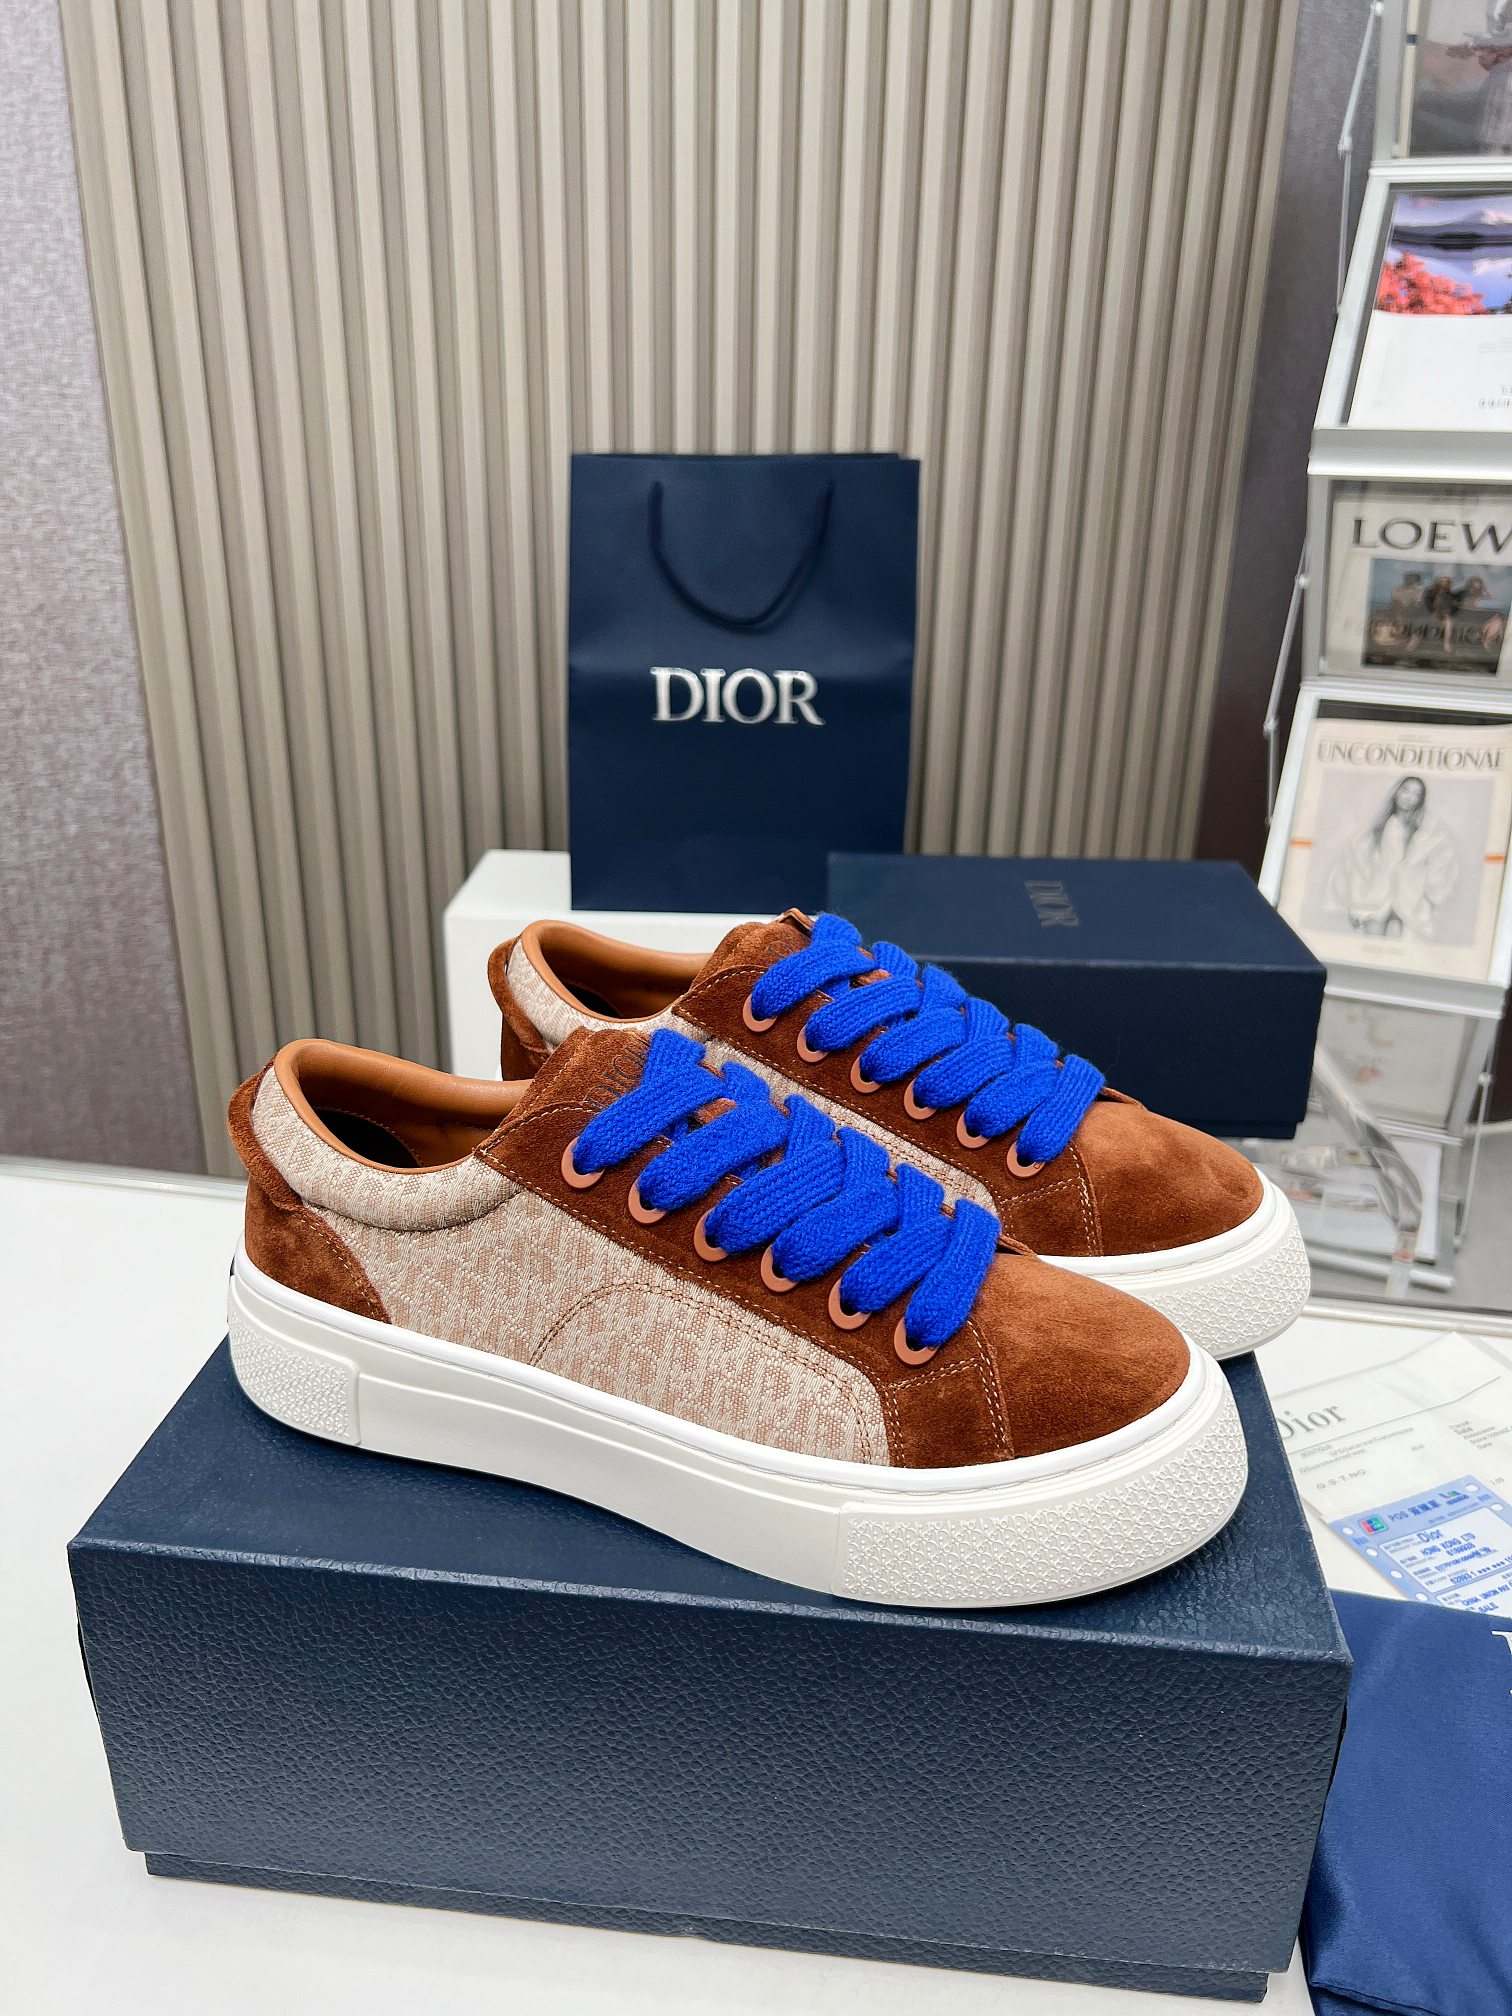 Dior Sneakers Single Layer Shoes Brown White Yellow Embroidery Unisex Women Men Cowhide Knitting Rubber Oblique Casual